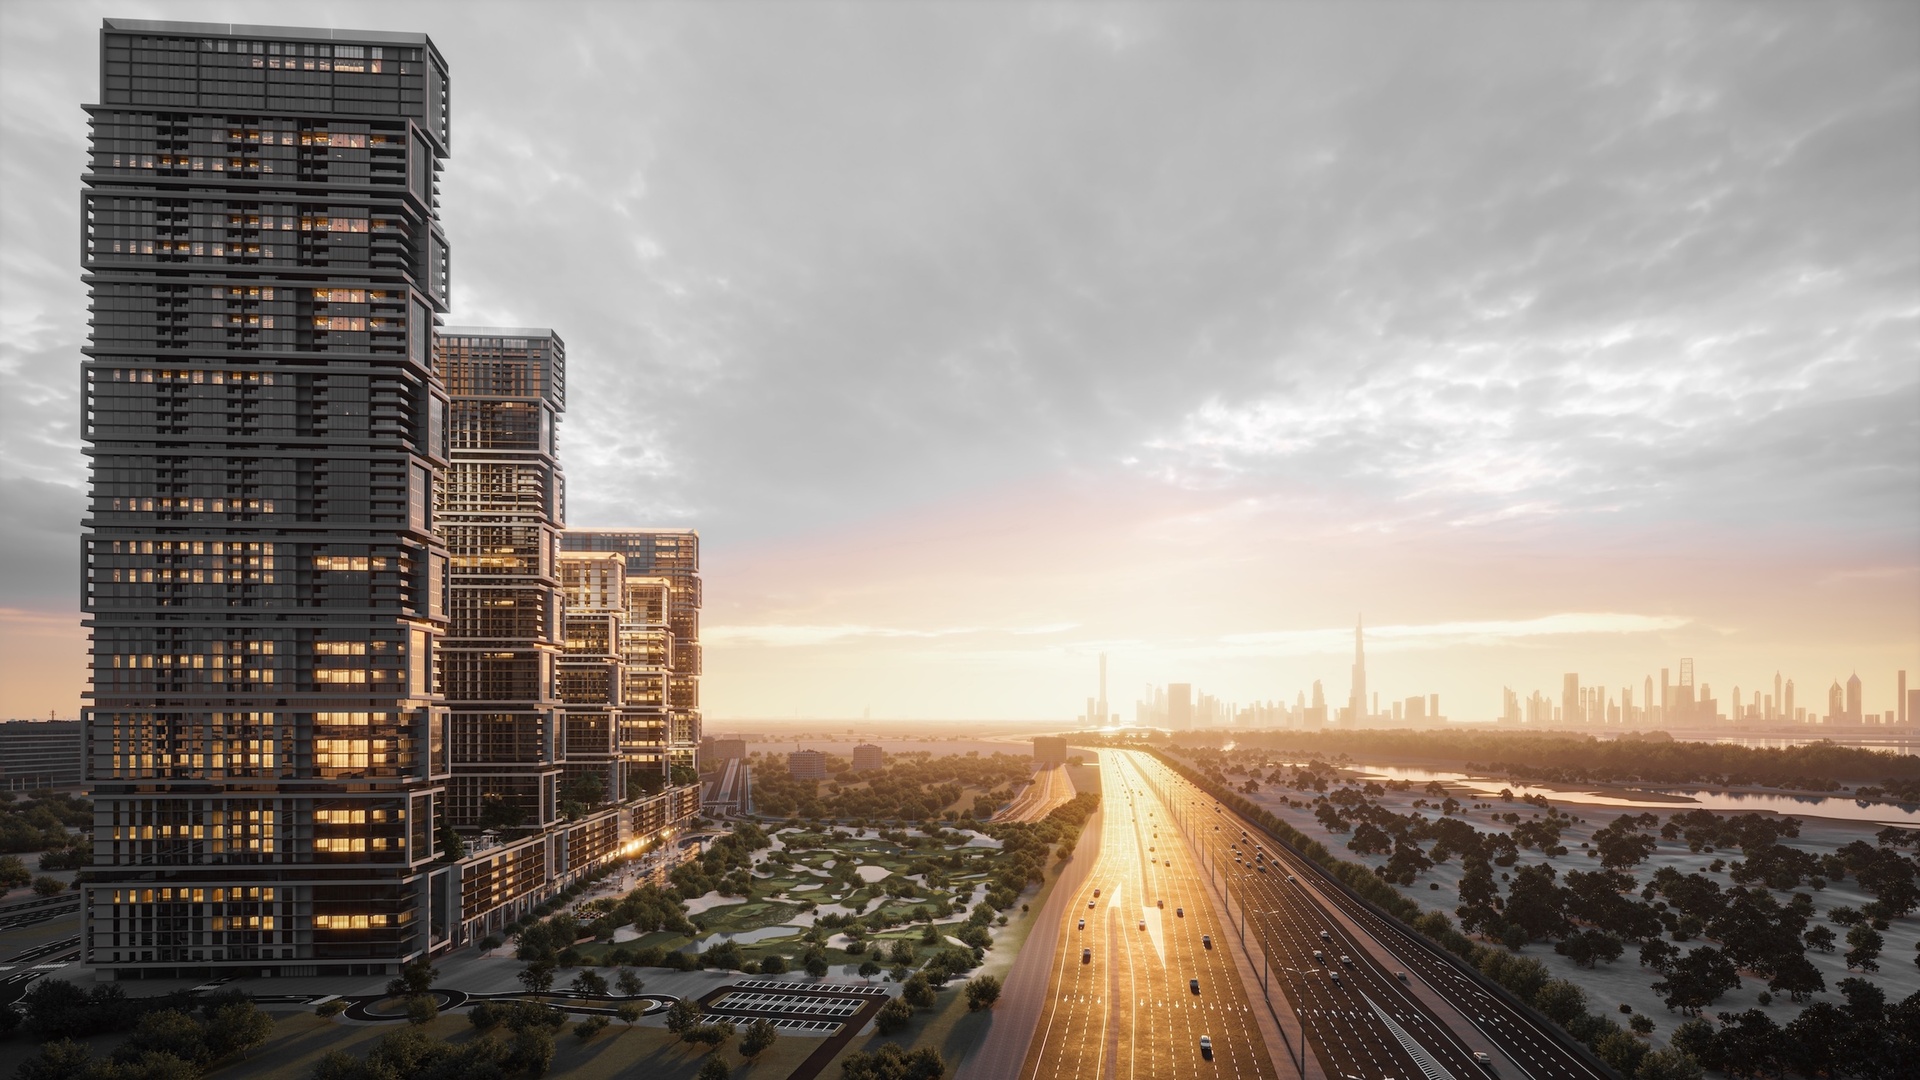 A unique skyscraper residential complex of luxury apartments and villas on the edge of downtown Dubai